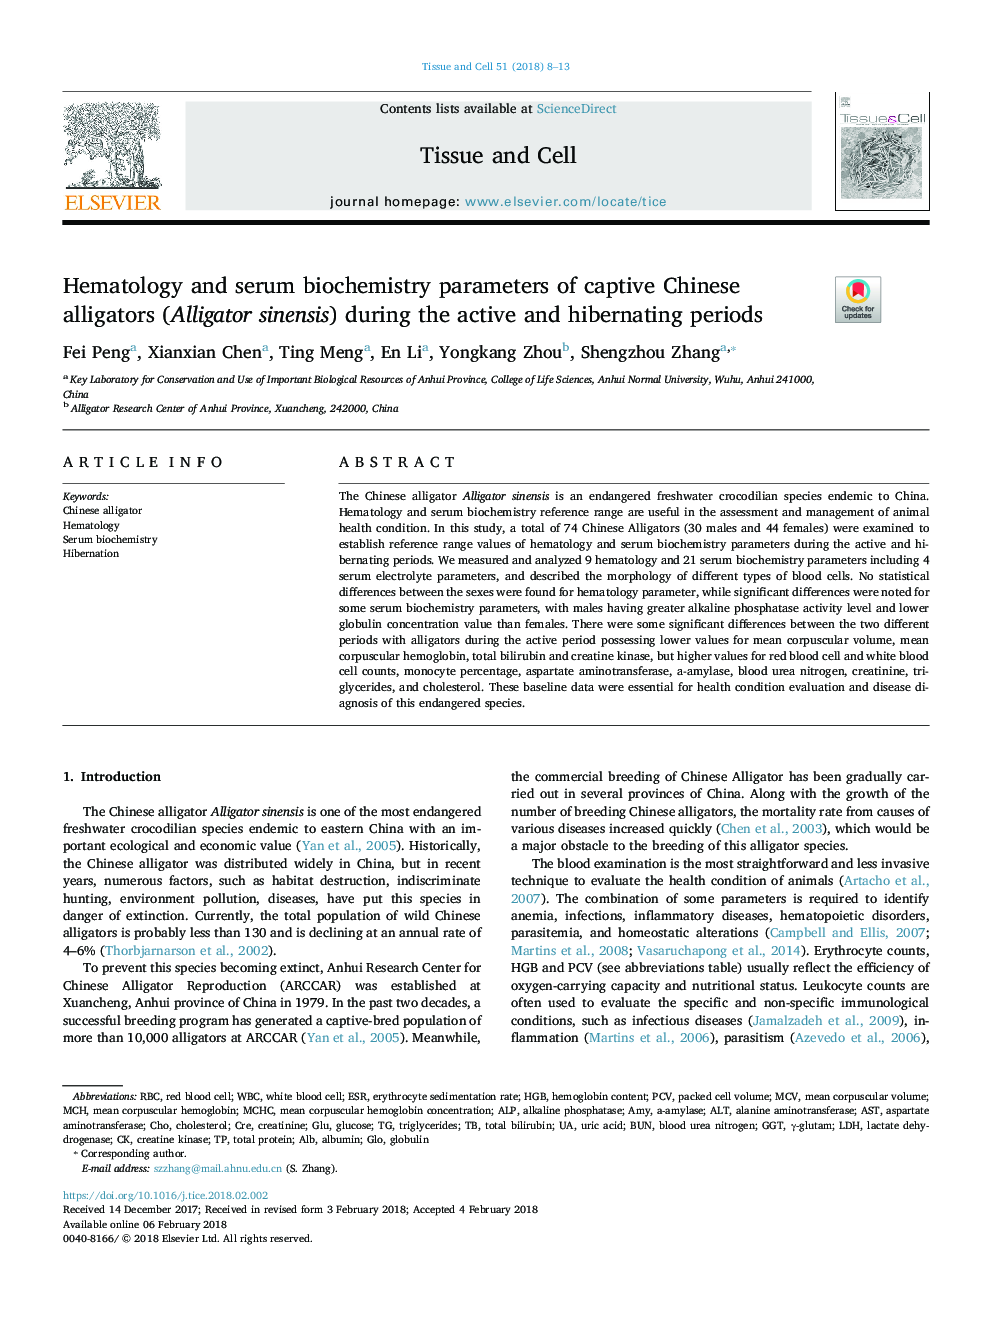 Hematology and serum biochemistry parameters of captive Chinese alligators (Alligator sinensis) during the active and hibernating periods